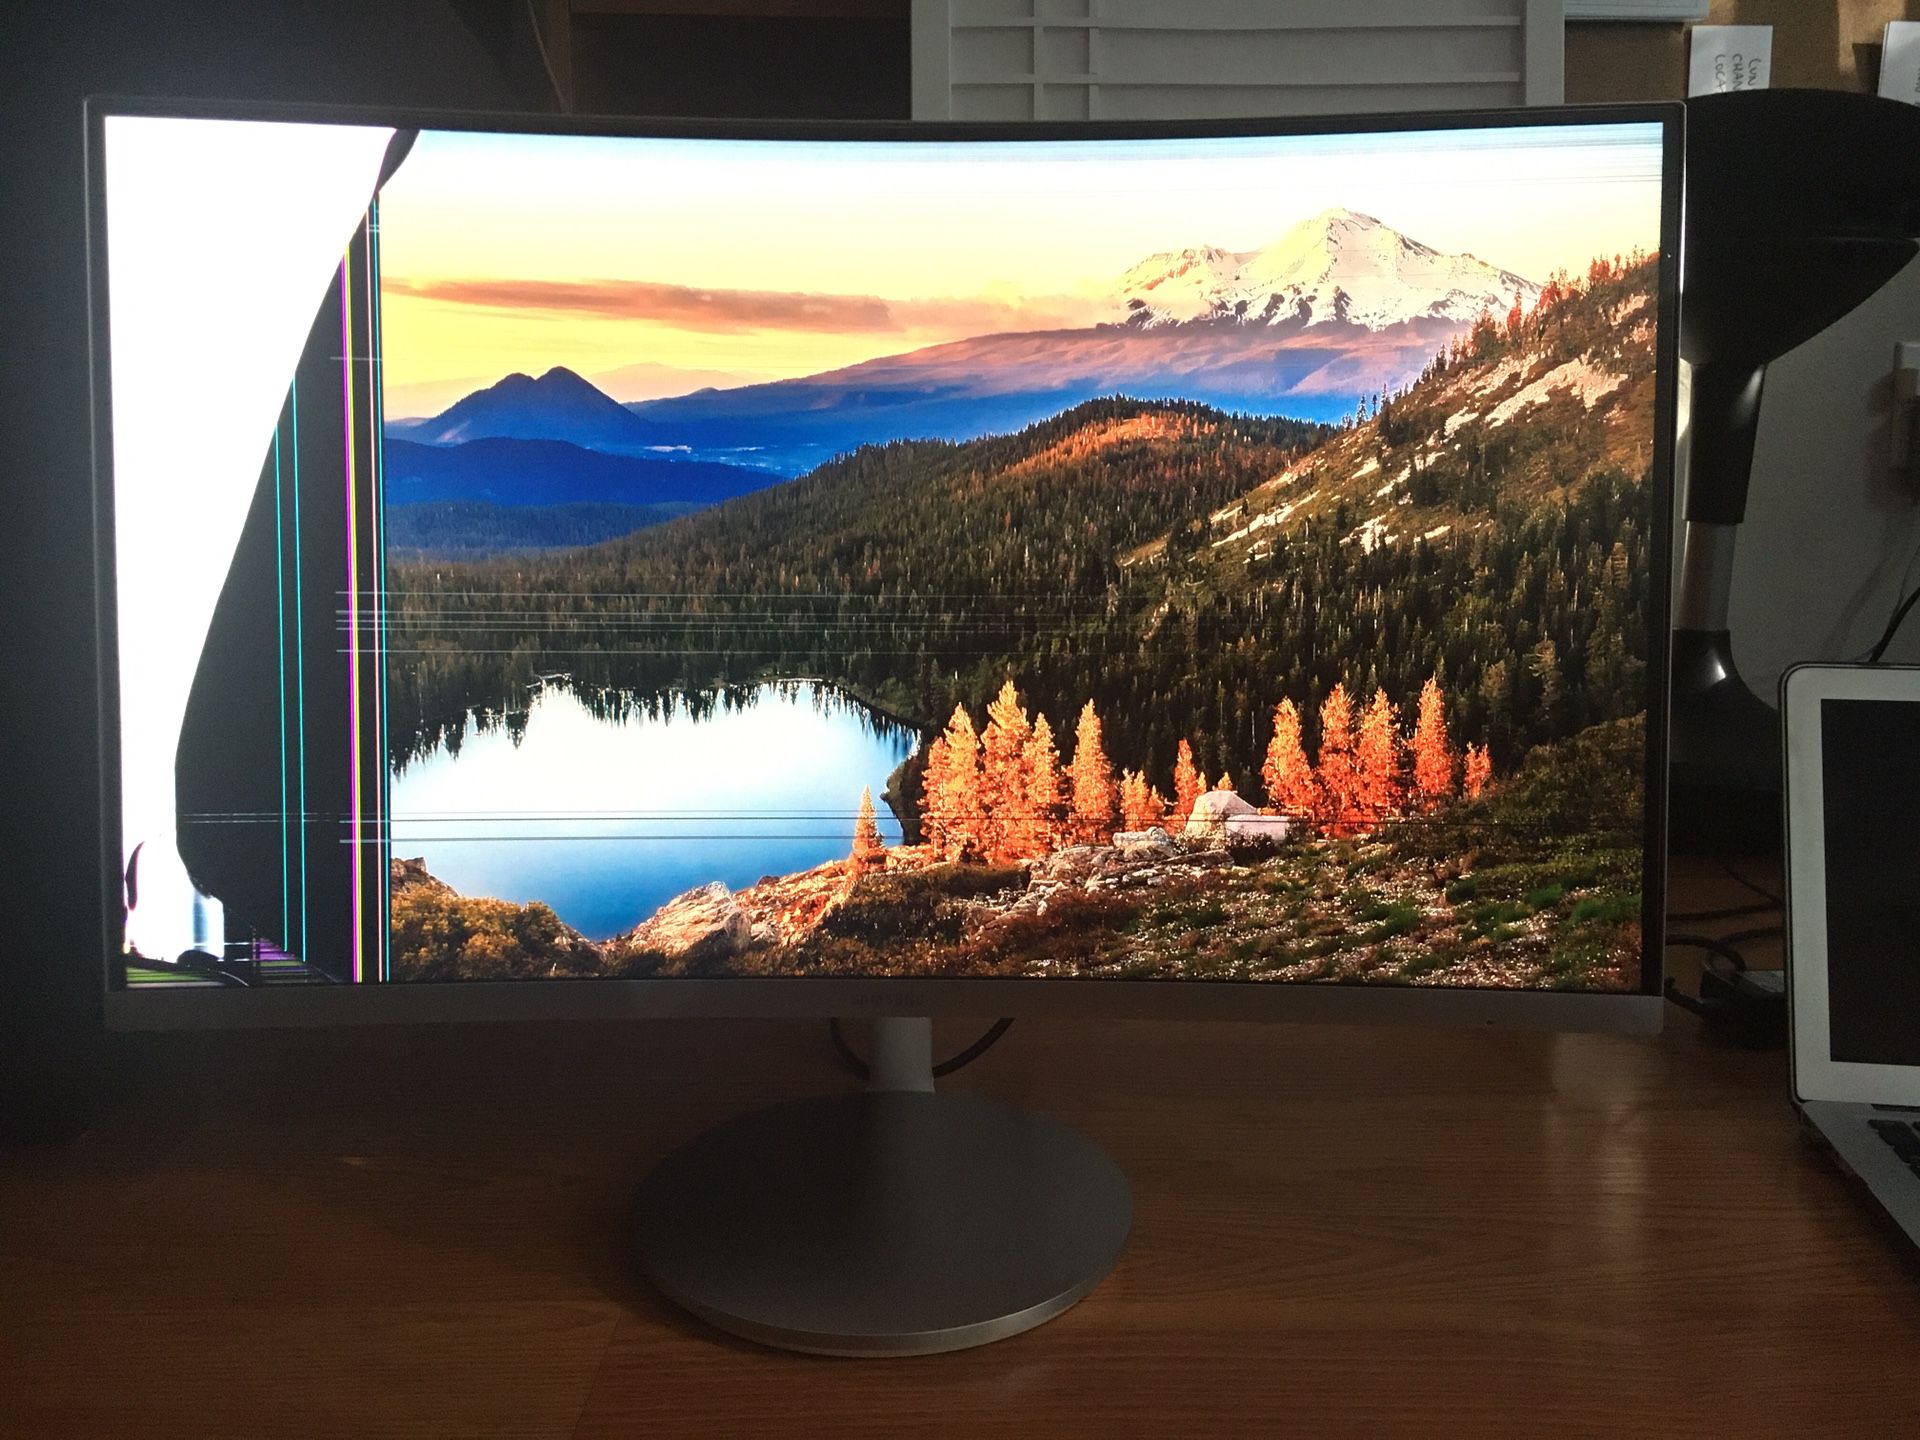 27” Curved Monitor Cracked for Parts- Free